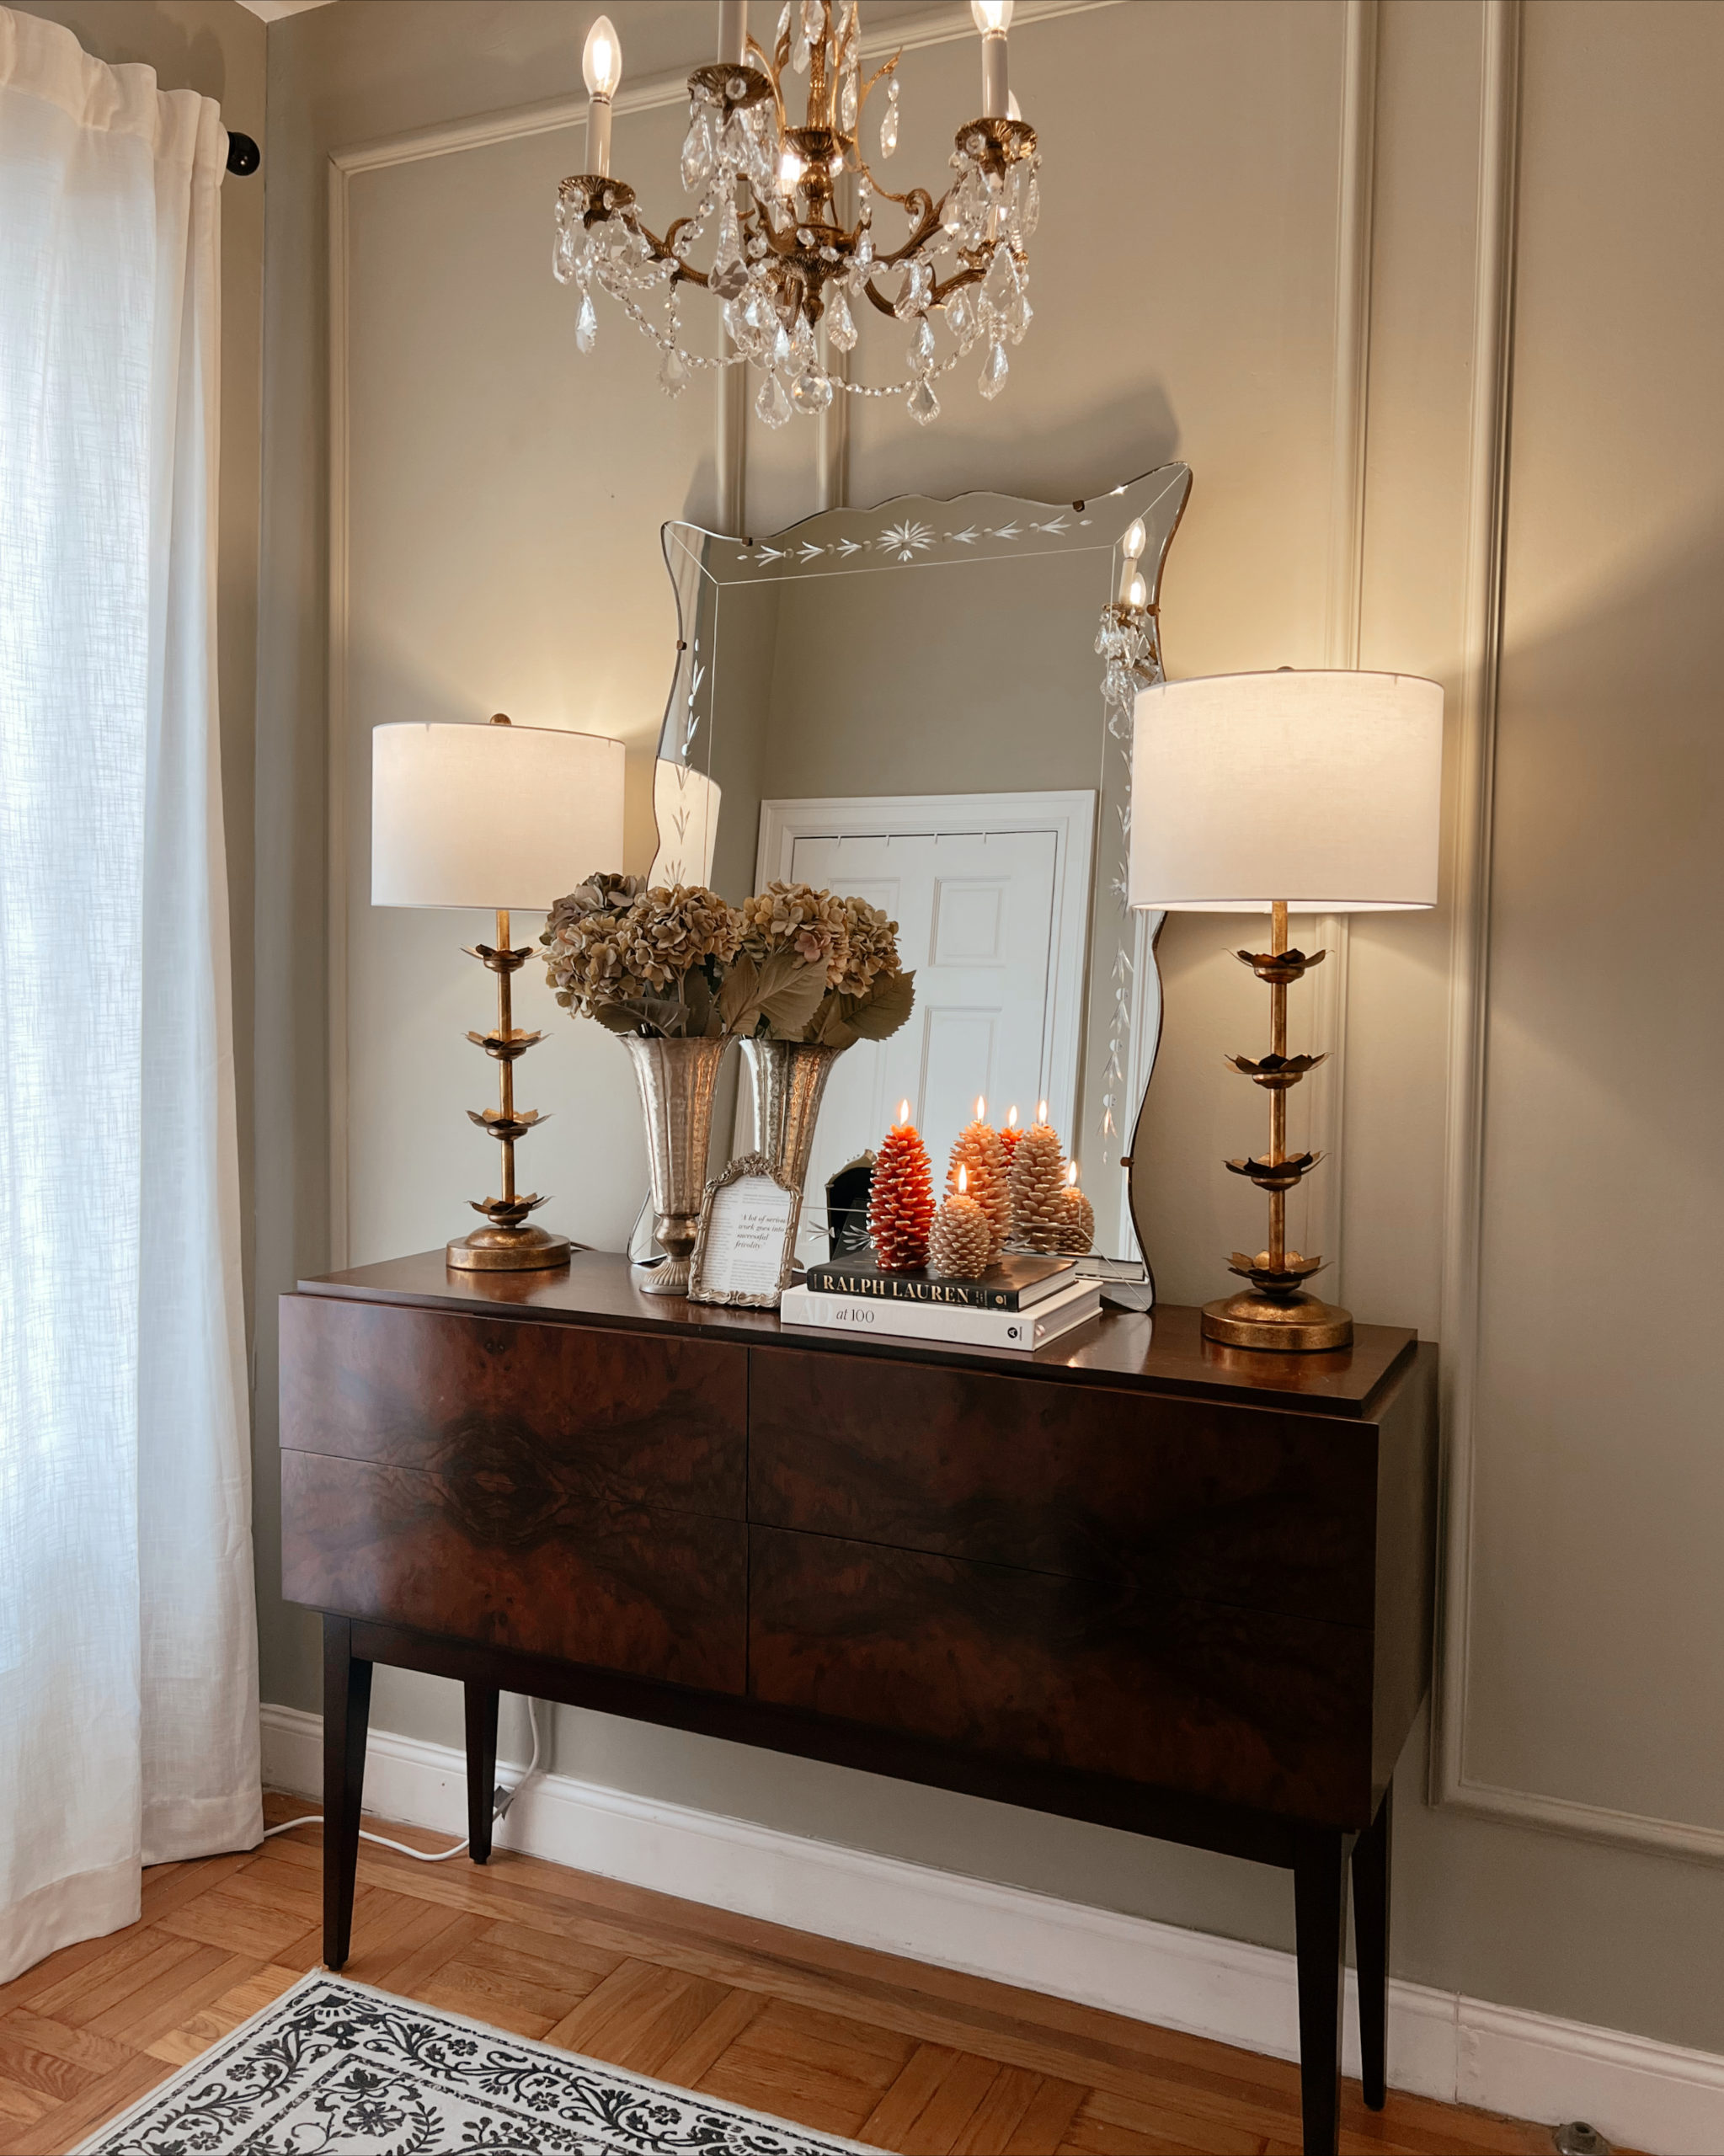 Anna's entryway with a mirror, two lamps, and decor in frame.